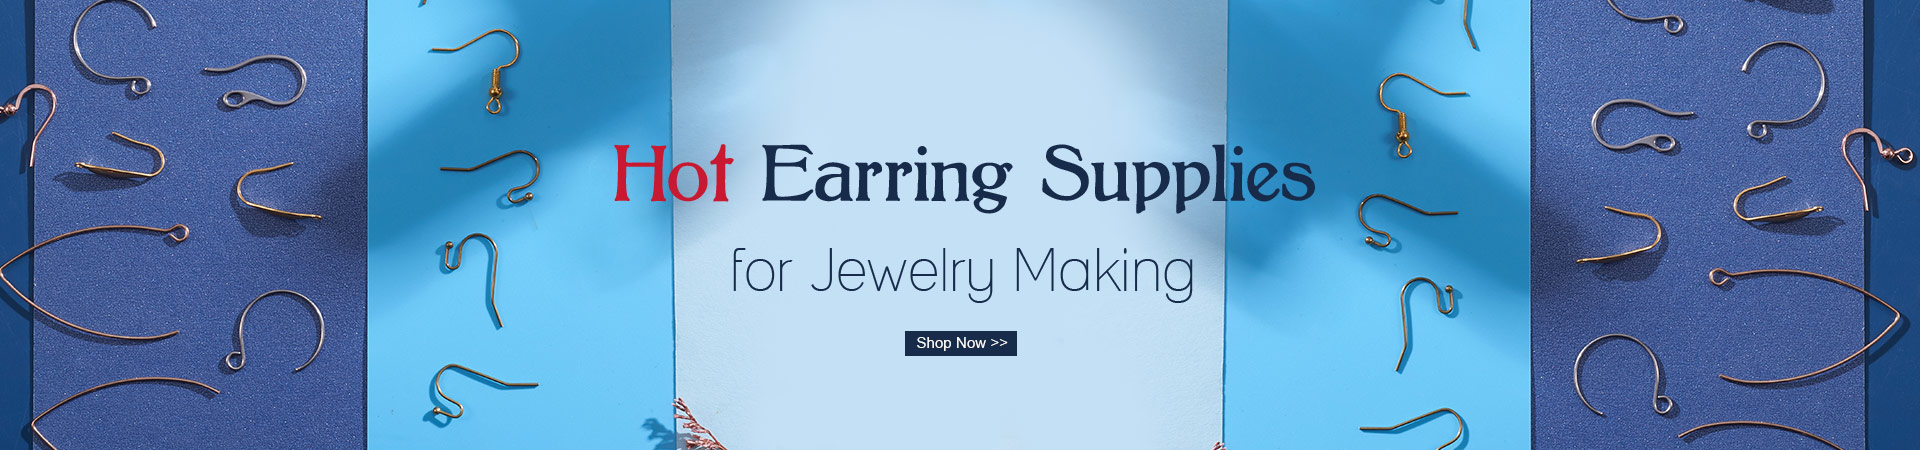 Hot Earring Supplies for Jewelry Making